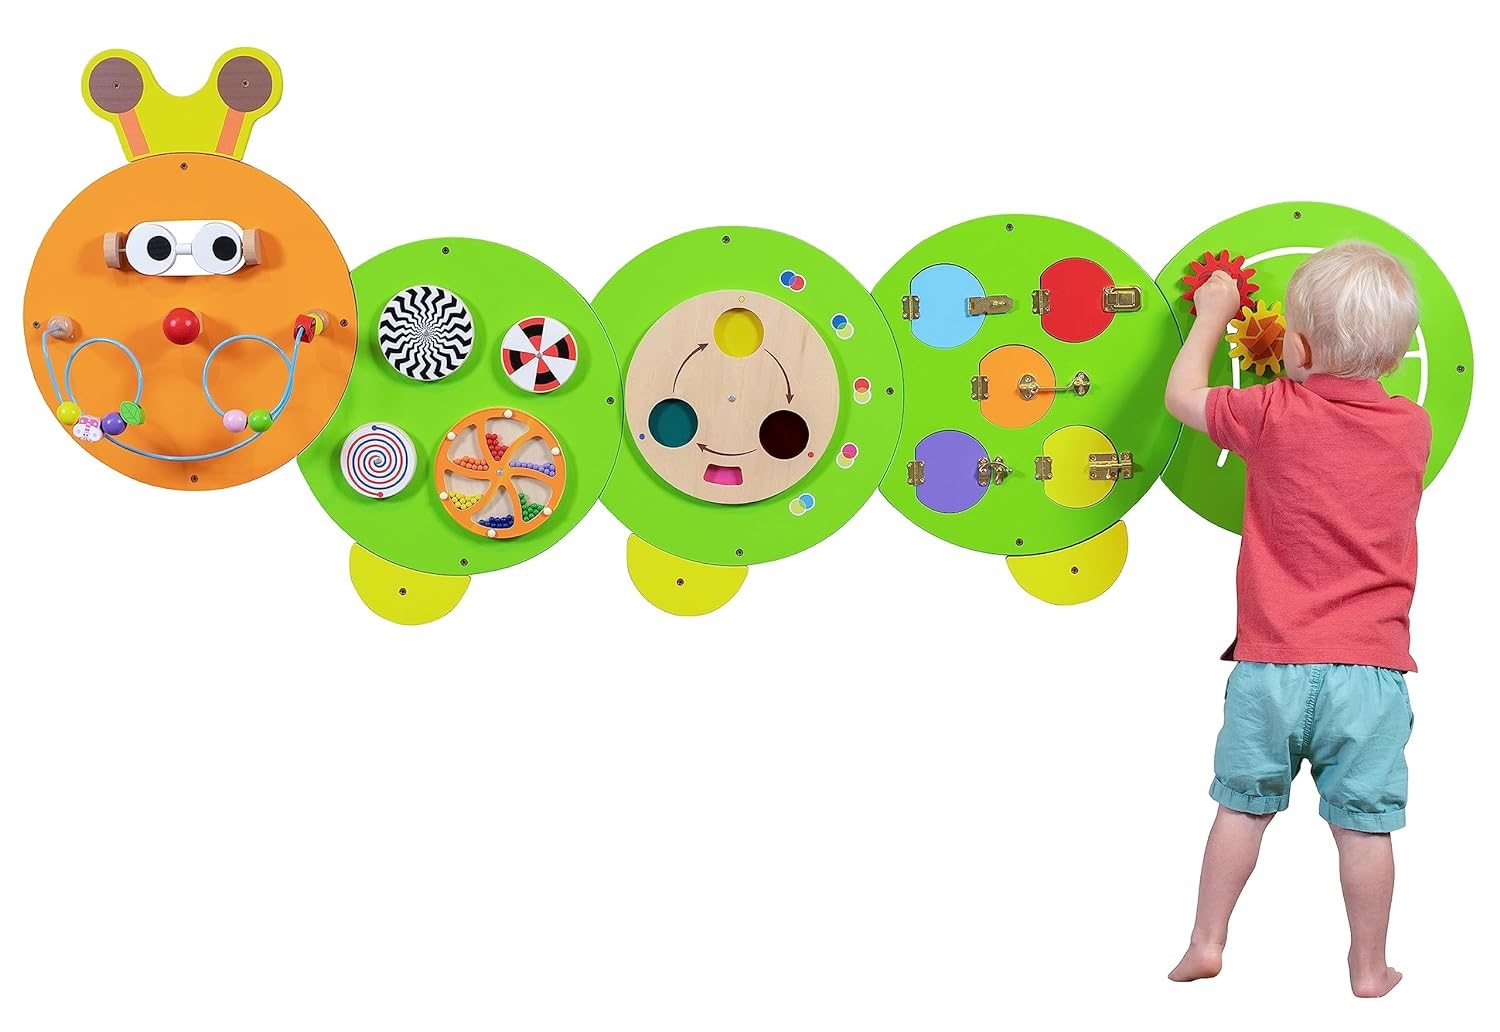 Caterpillar Activity Wall Panels for children with autism